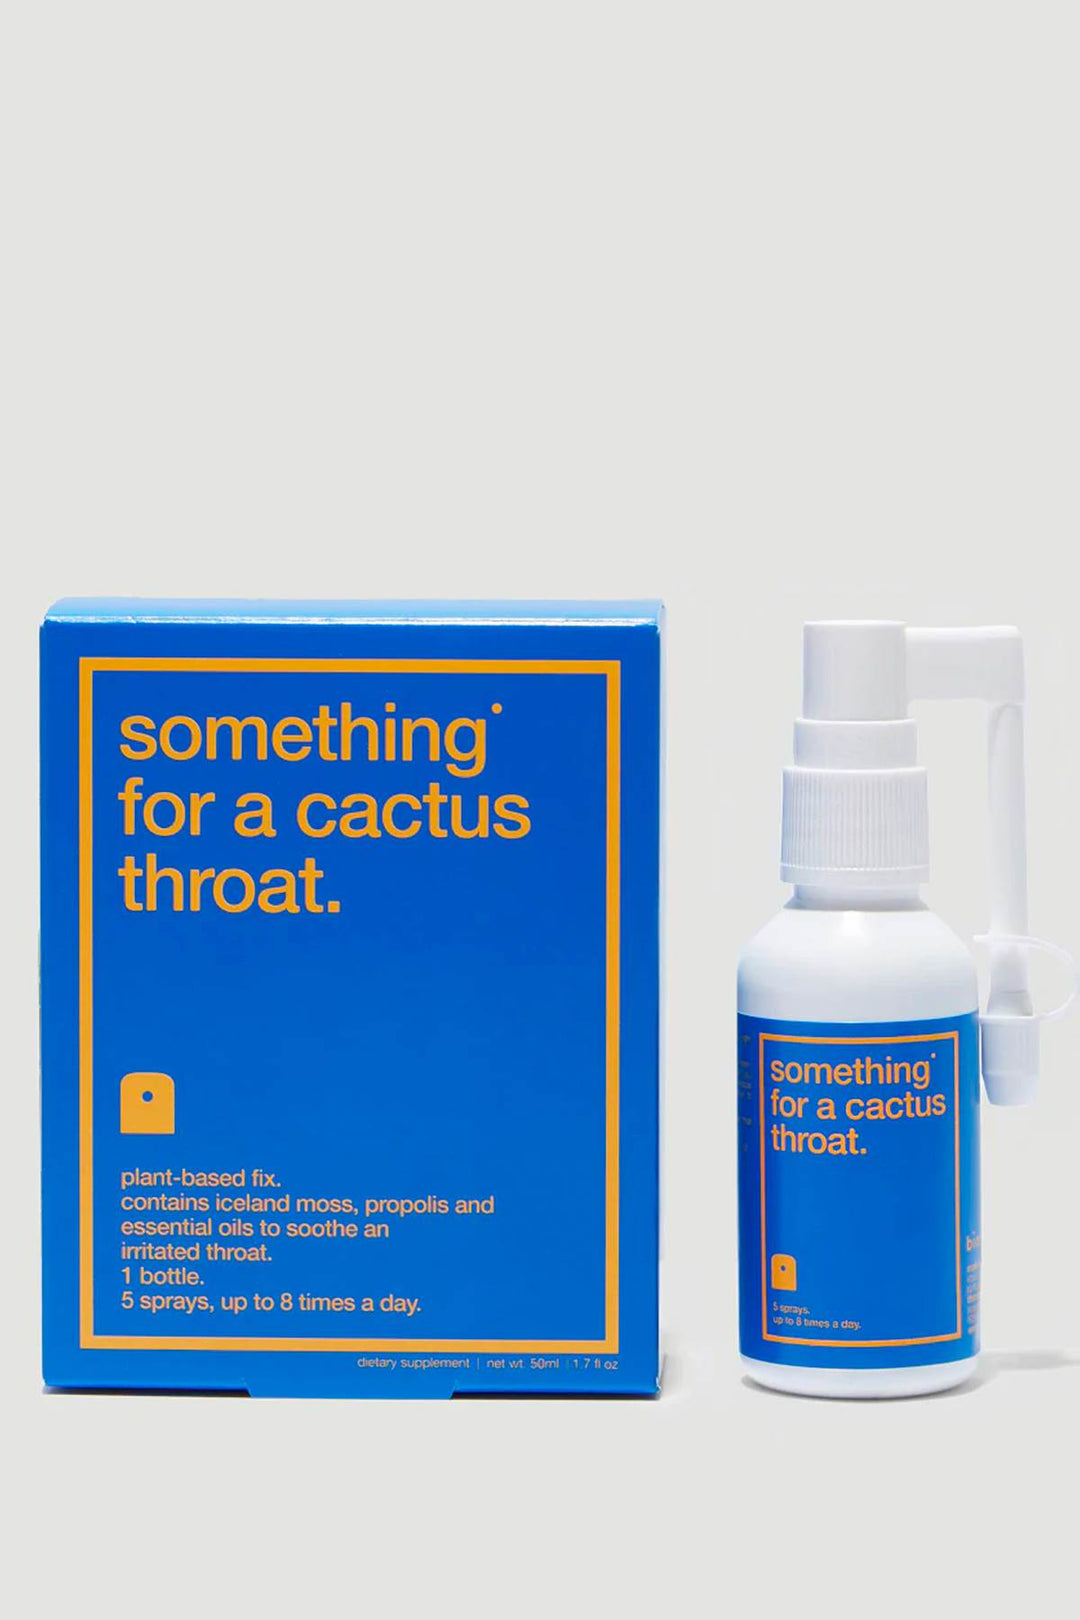 Biocol labs something for a cactus throat-1